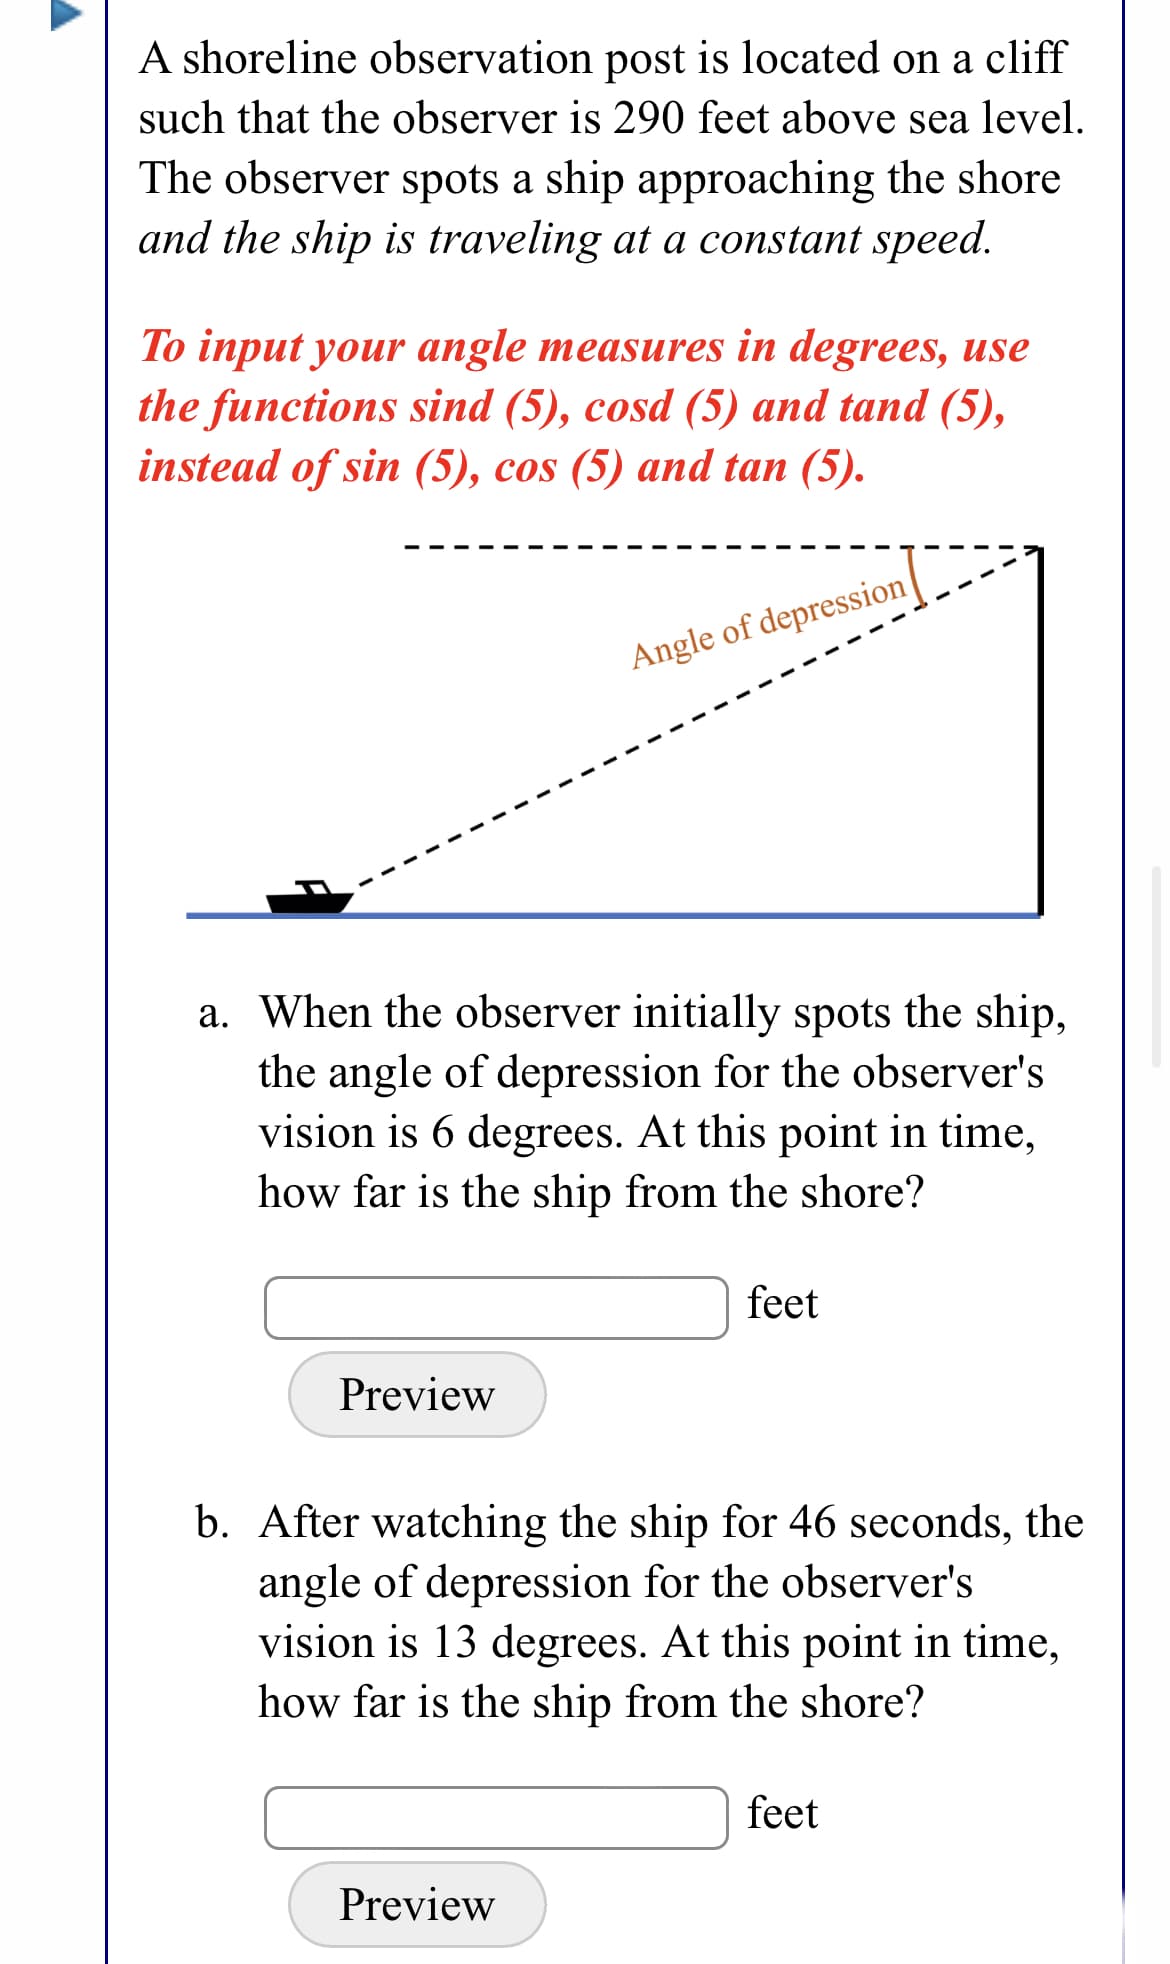 A shoreline observation post is located on a cliff
such that the observer is 290 feet above sea level.
The observer spots a ship approaching the shore
and the ship is traveling at a constant speed.
To input your angle measures in degrees, use
the functions sind (5), cosd (5) and tand (5),
instead of sin (5), cos (5) and tan (5).
Angle of depression|
a. When the observer initially spots the ship,
the angle of depression for the observer's
vision is 6 degrees. At this point in time,
how far is the ship from the shore?
feet
Preview
b. After watching the ship for 46 seconds, the
angle of depression for the observer's
vision is 13 degrees. At this point in time,
how far is the ship from the shore?
feet
Preview
